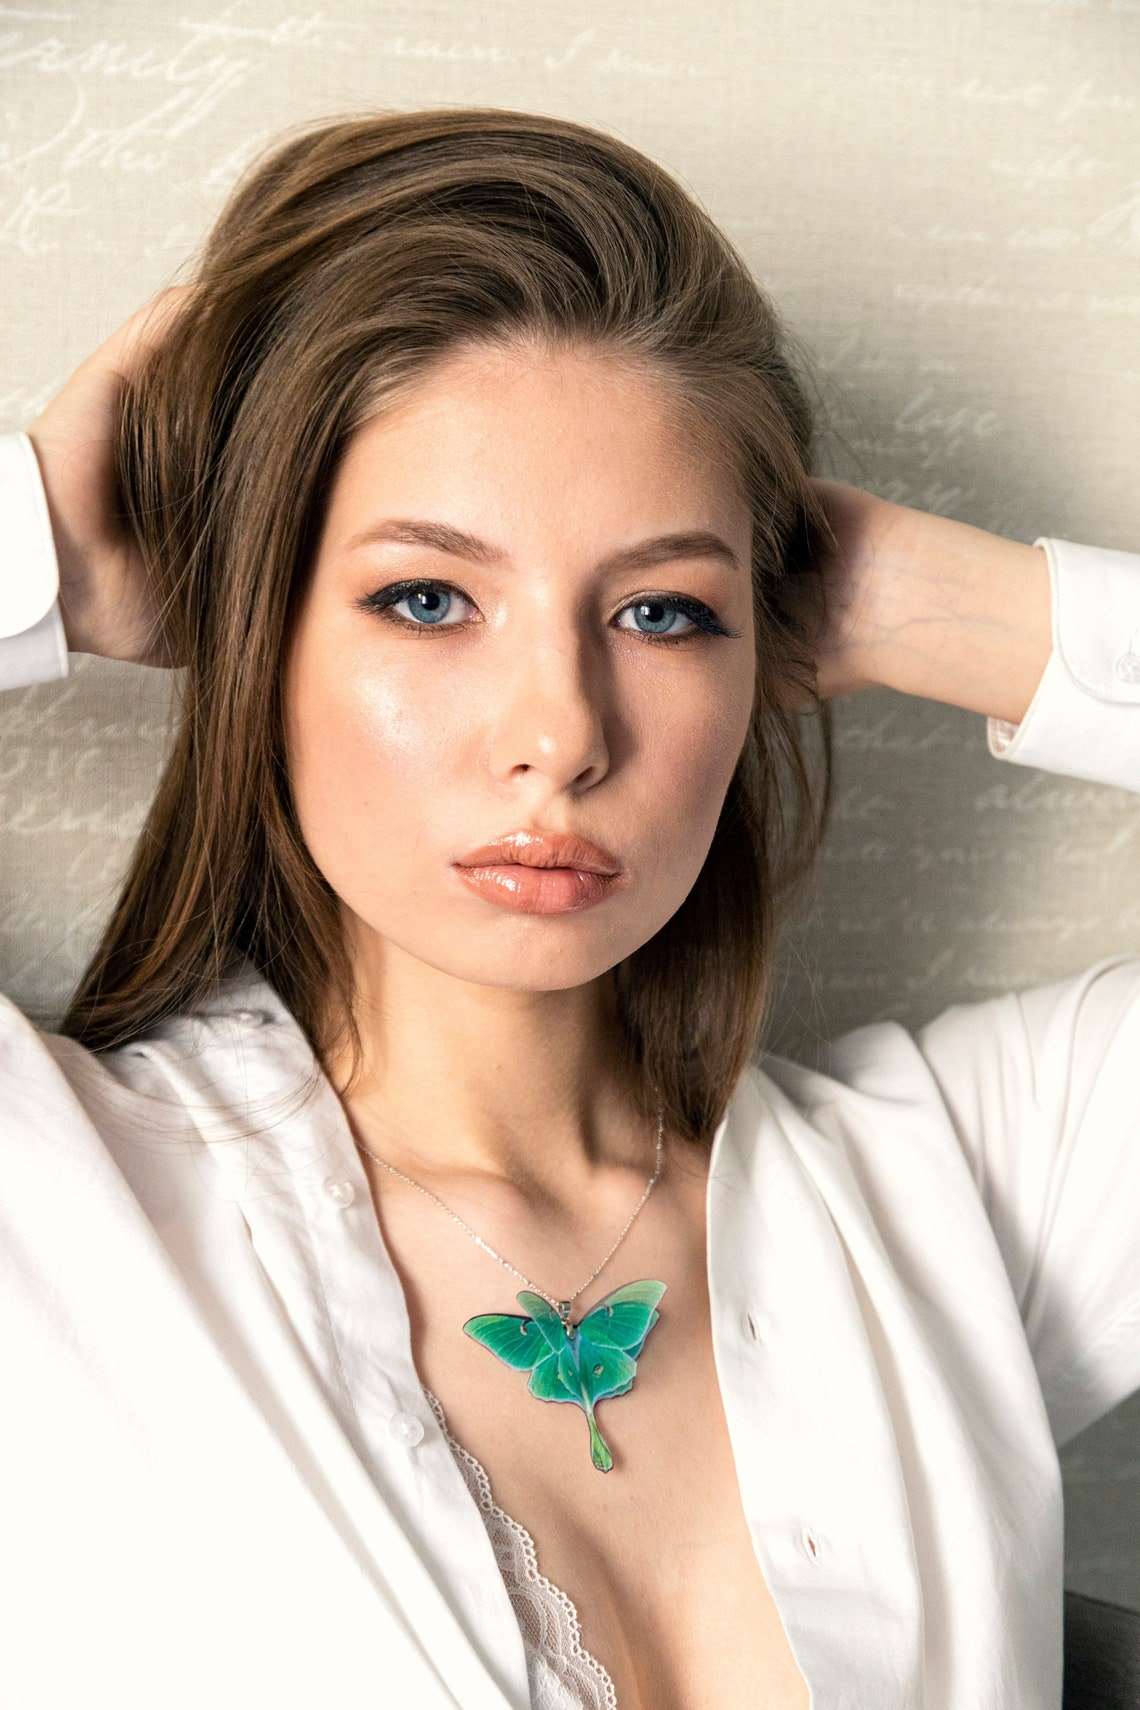 Model wearing the Green Lunar Moth Pendant - A beautiful and meaningful piece of jewelry for any occasion